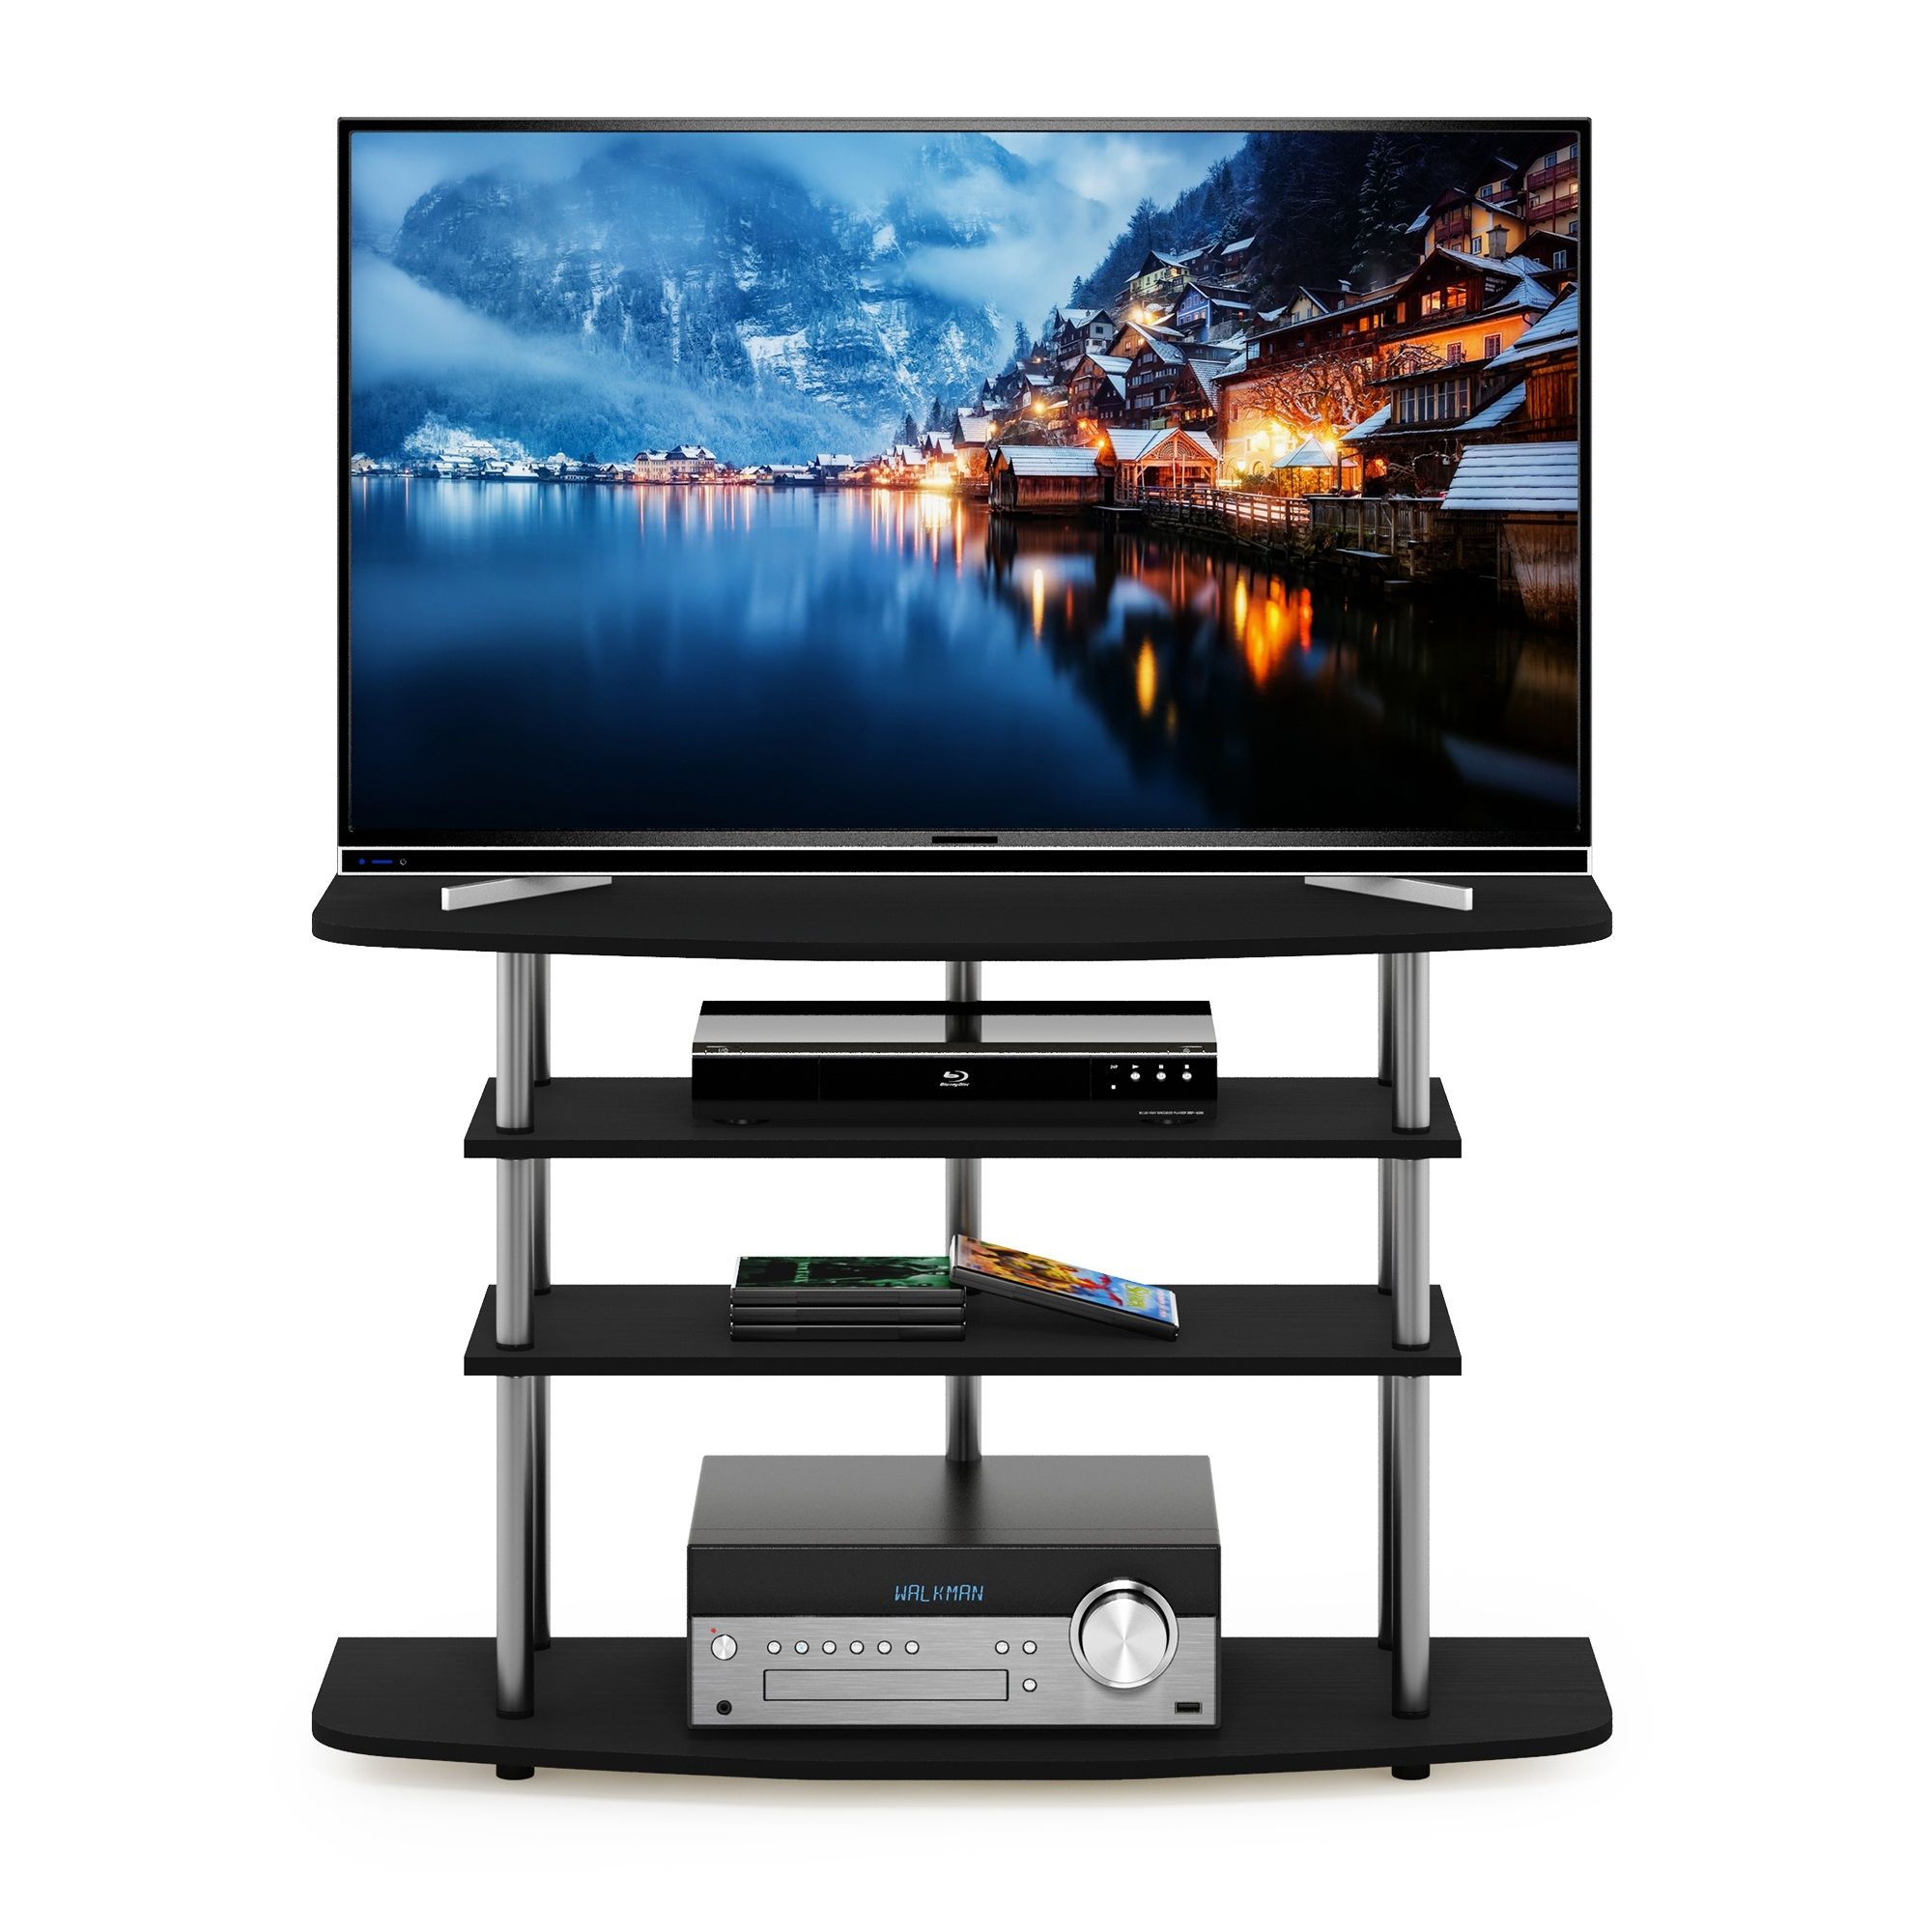 Furinno Frans Turn N Tube 4 Tier Tv Stand For Tv Up To 46 With Regard To Furinno Jaya Large Tv Stands With Storage Bin (View 15 of 15)